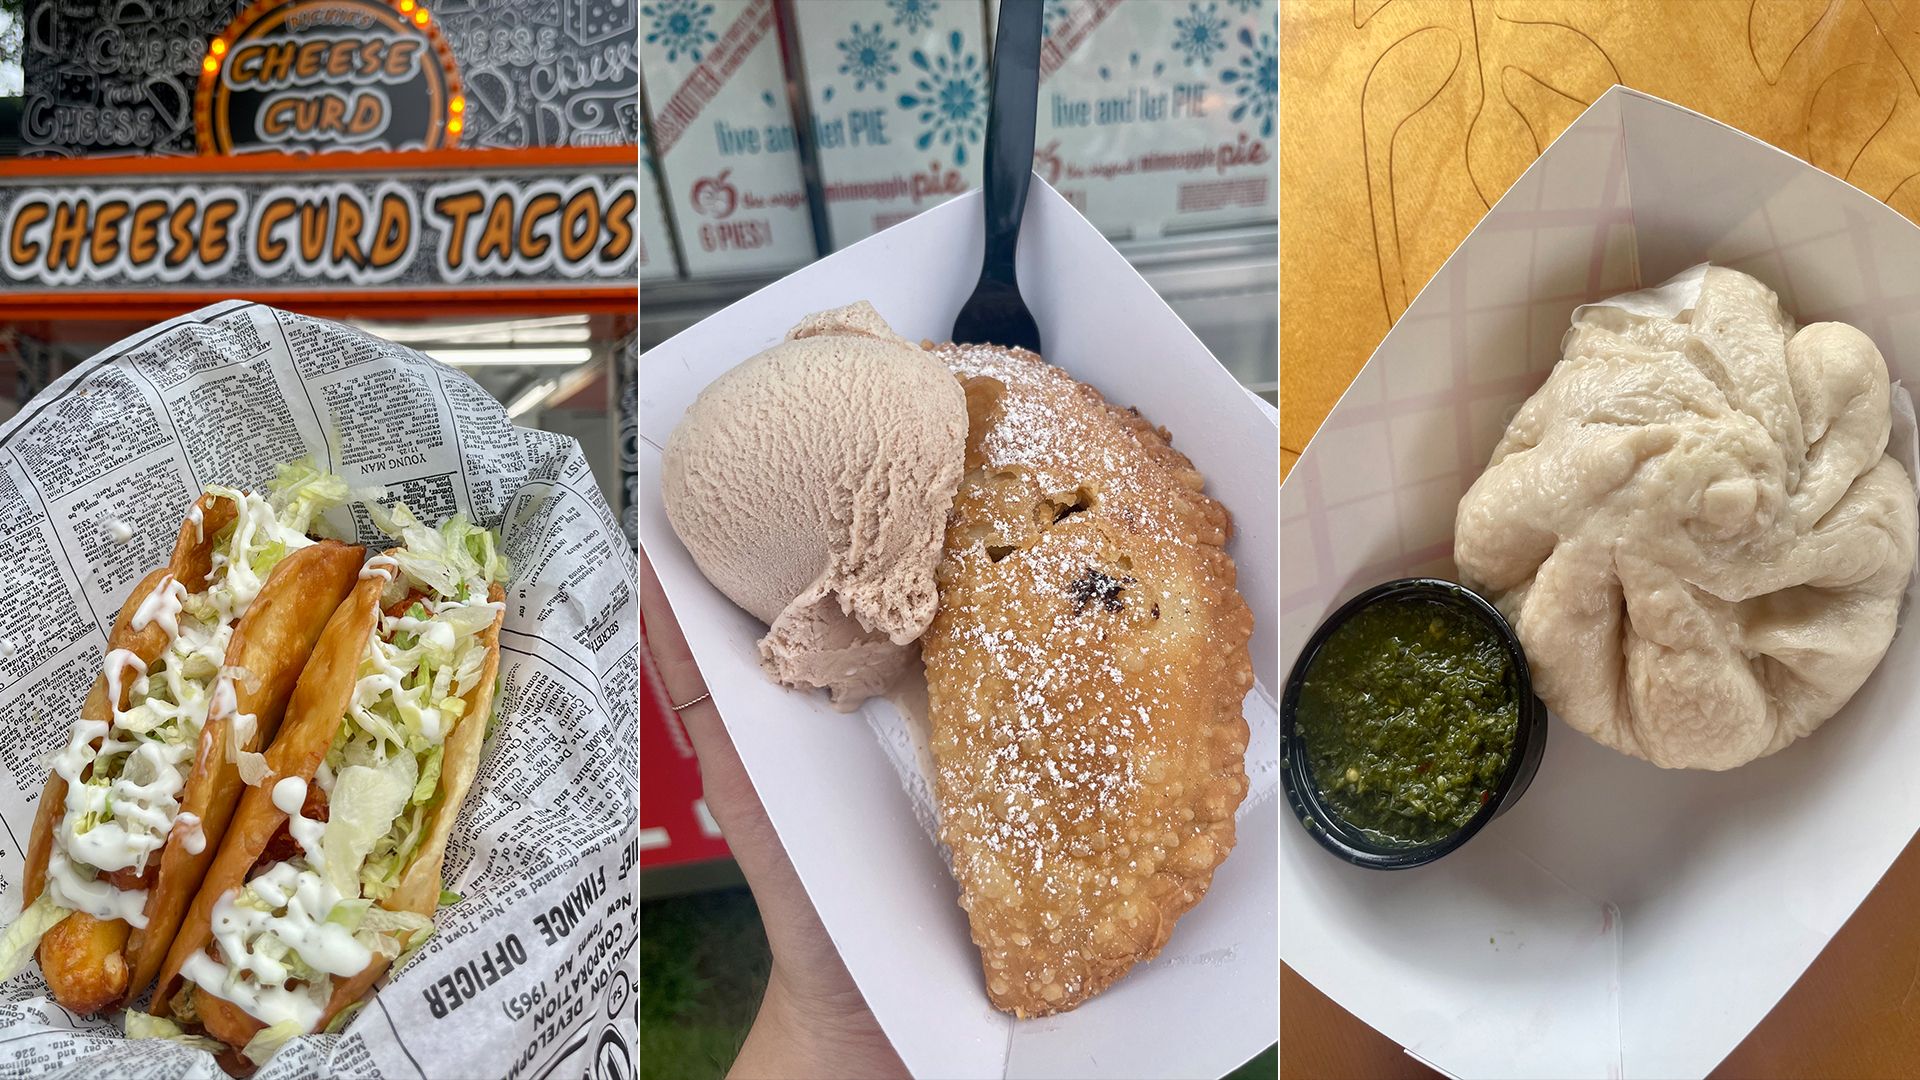 Photos of tacos, a small pie and a steamed bun.